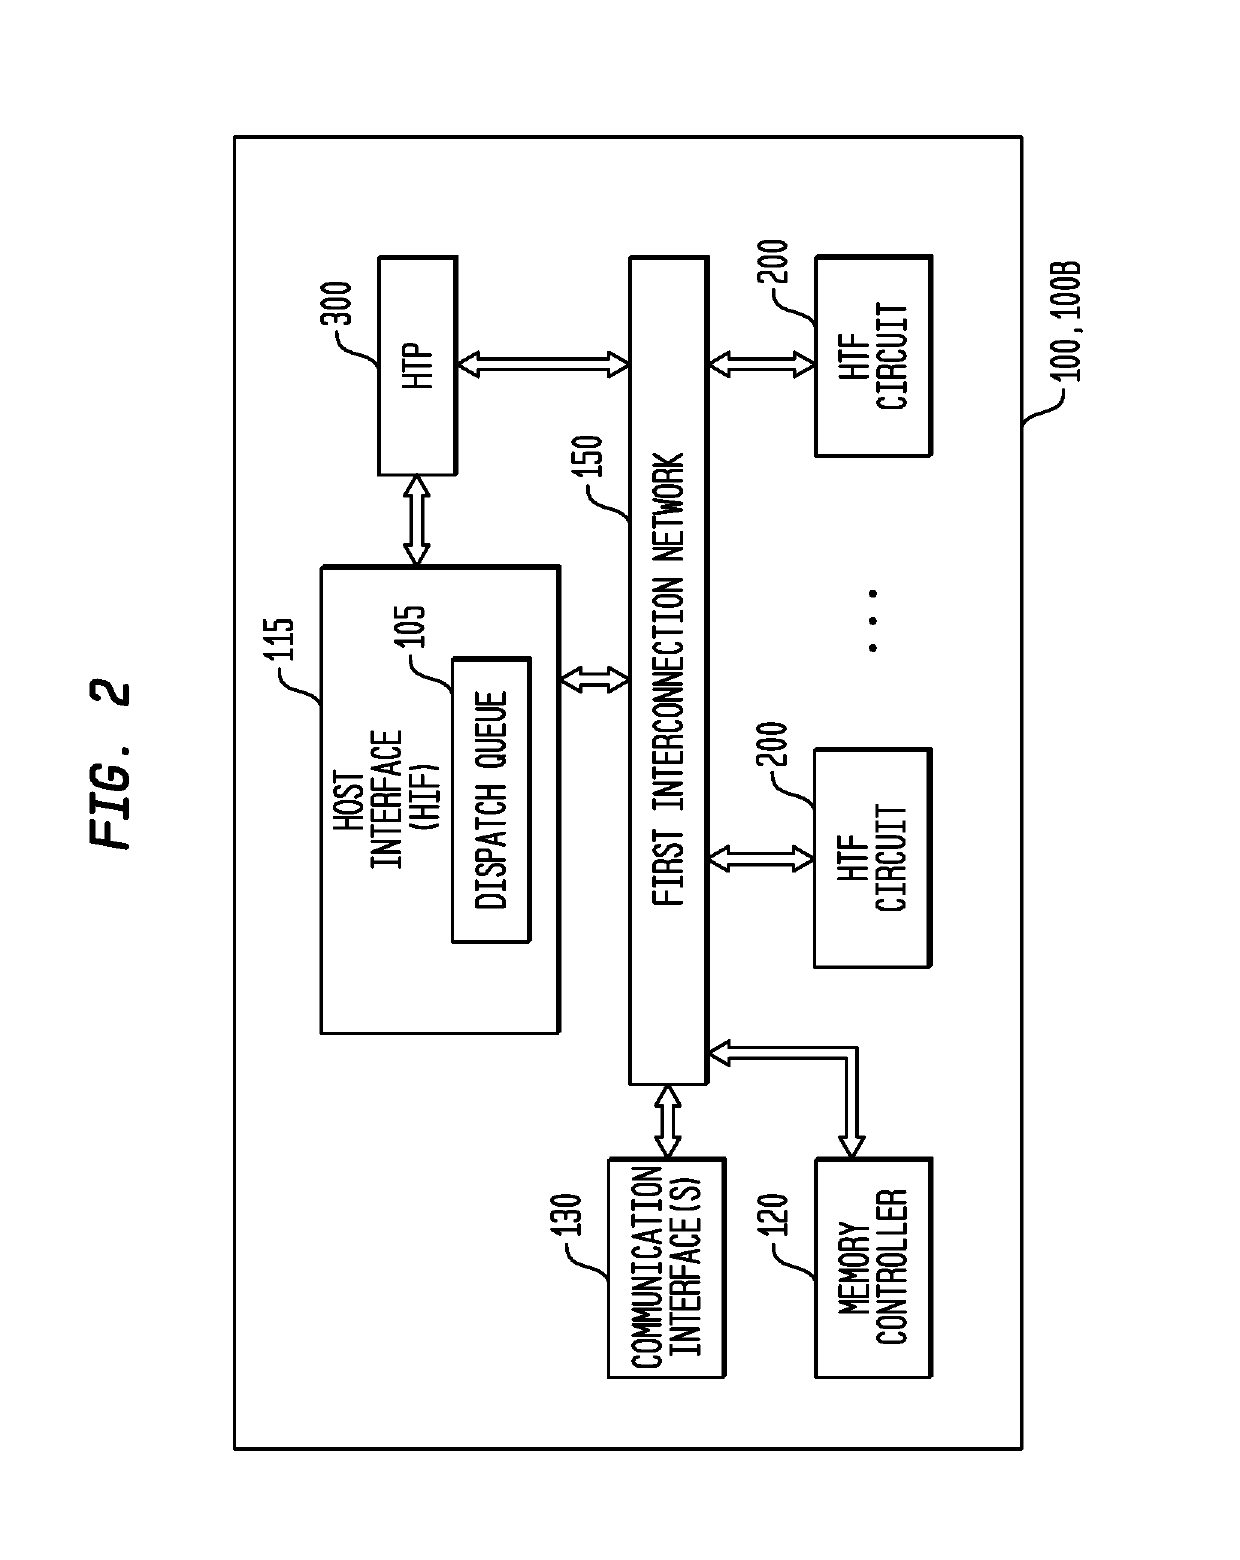 Loop Thread Order Execution Control of a Multi-Threaded, Self-Scheduling Reconfigurable Computing Fabric